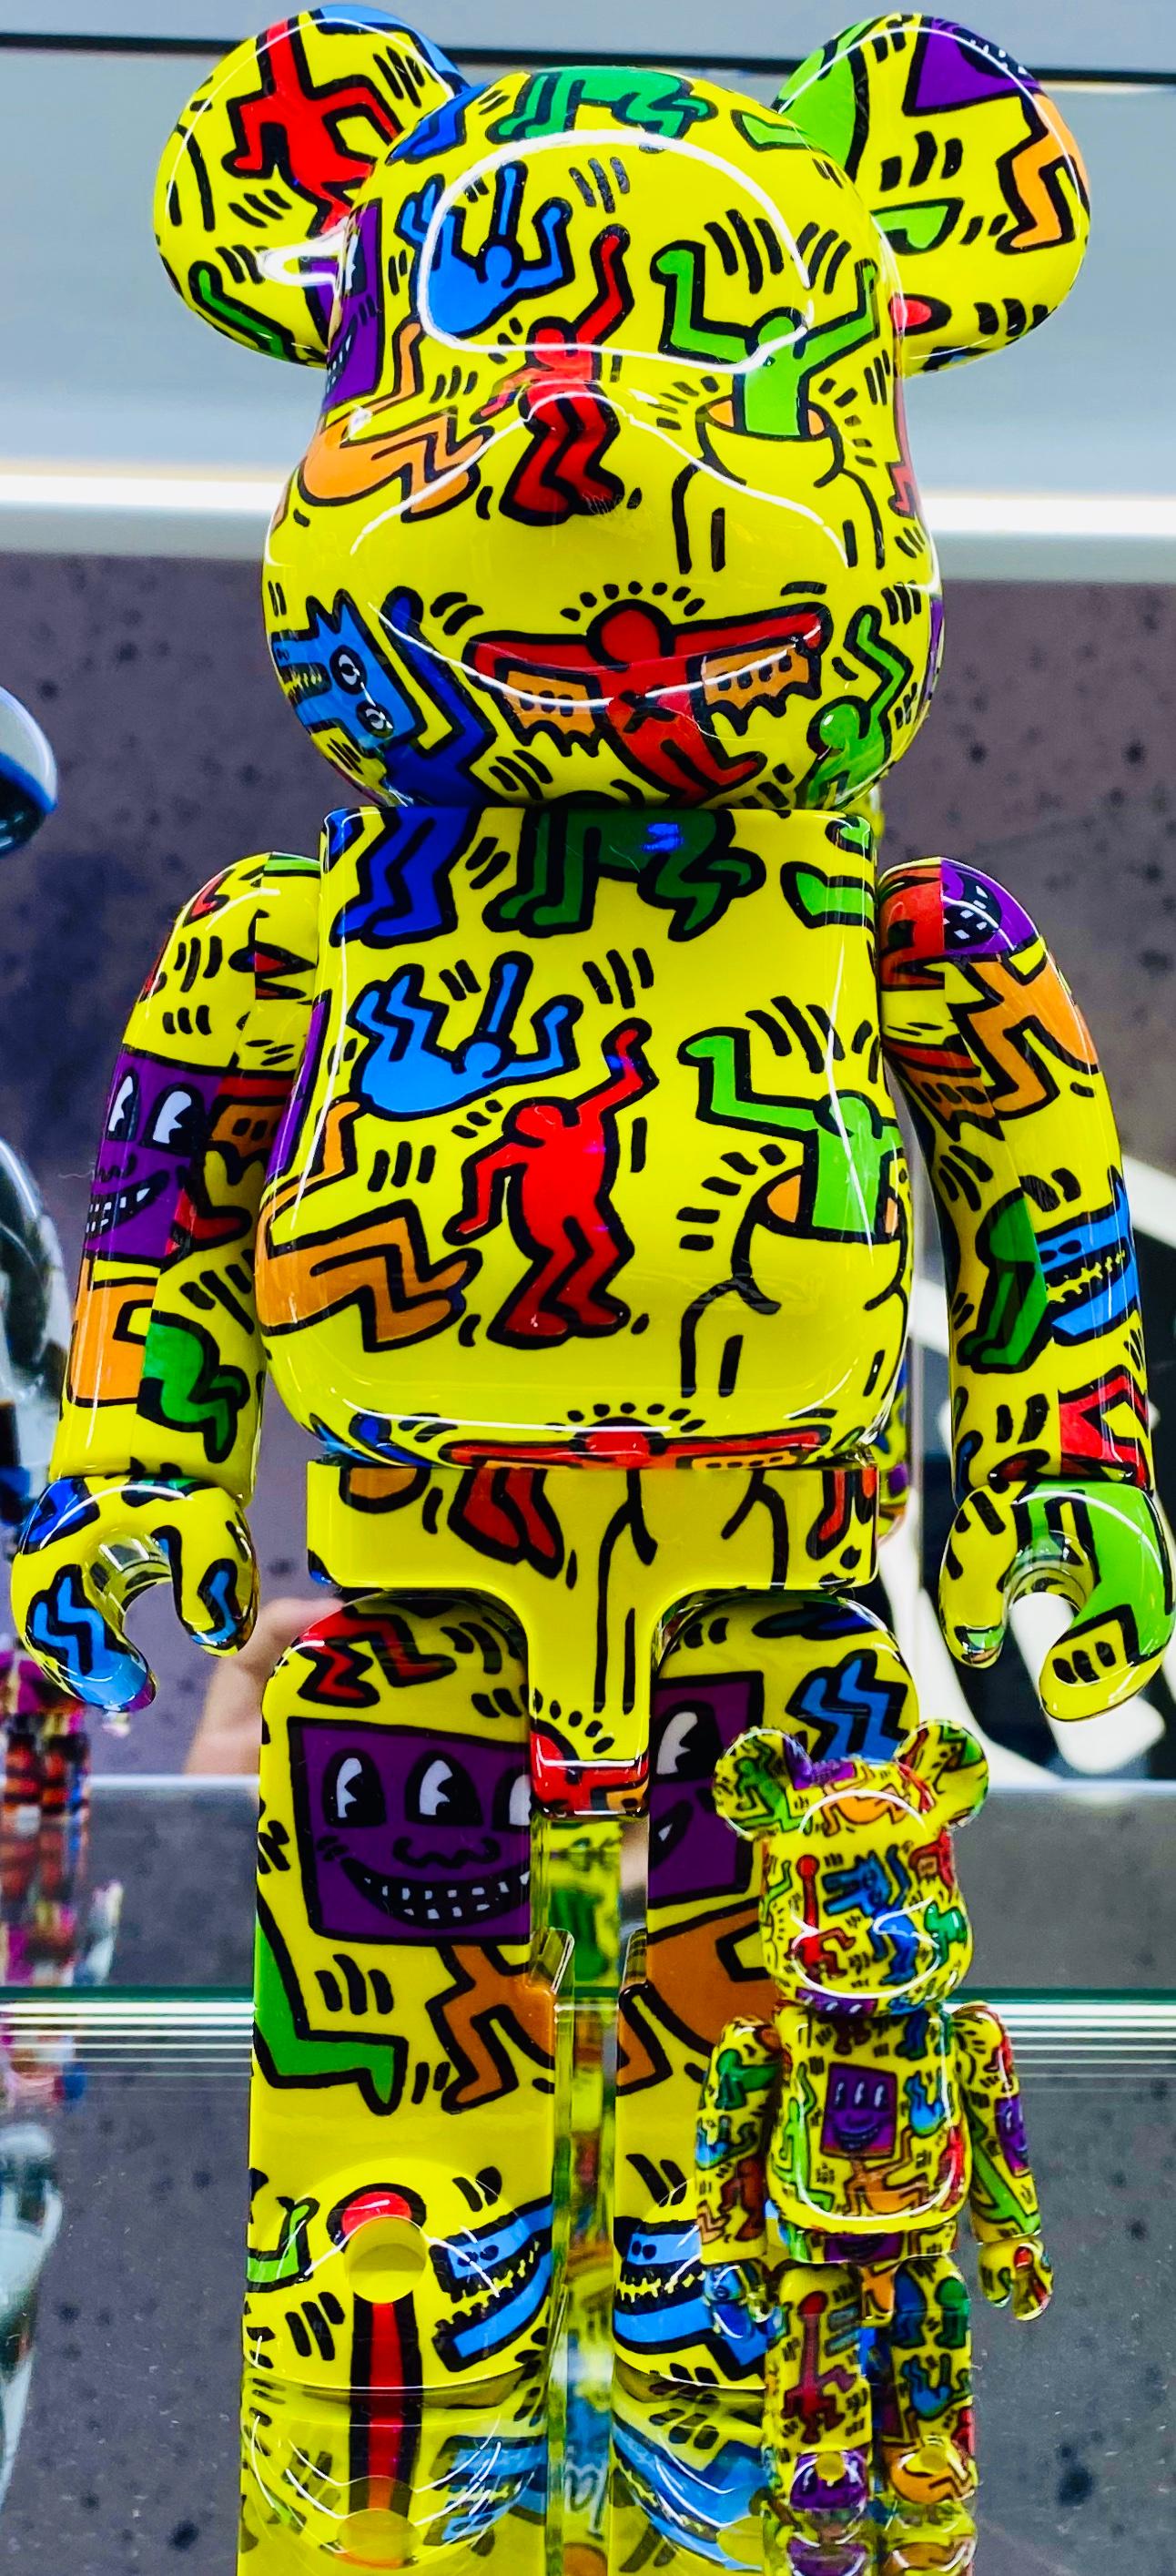 (after) Keith Haring Figurative Sculpture - Keith Haring Bearbrick 400% Companion (Haring BE@RBRICK)